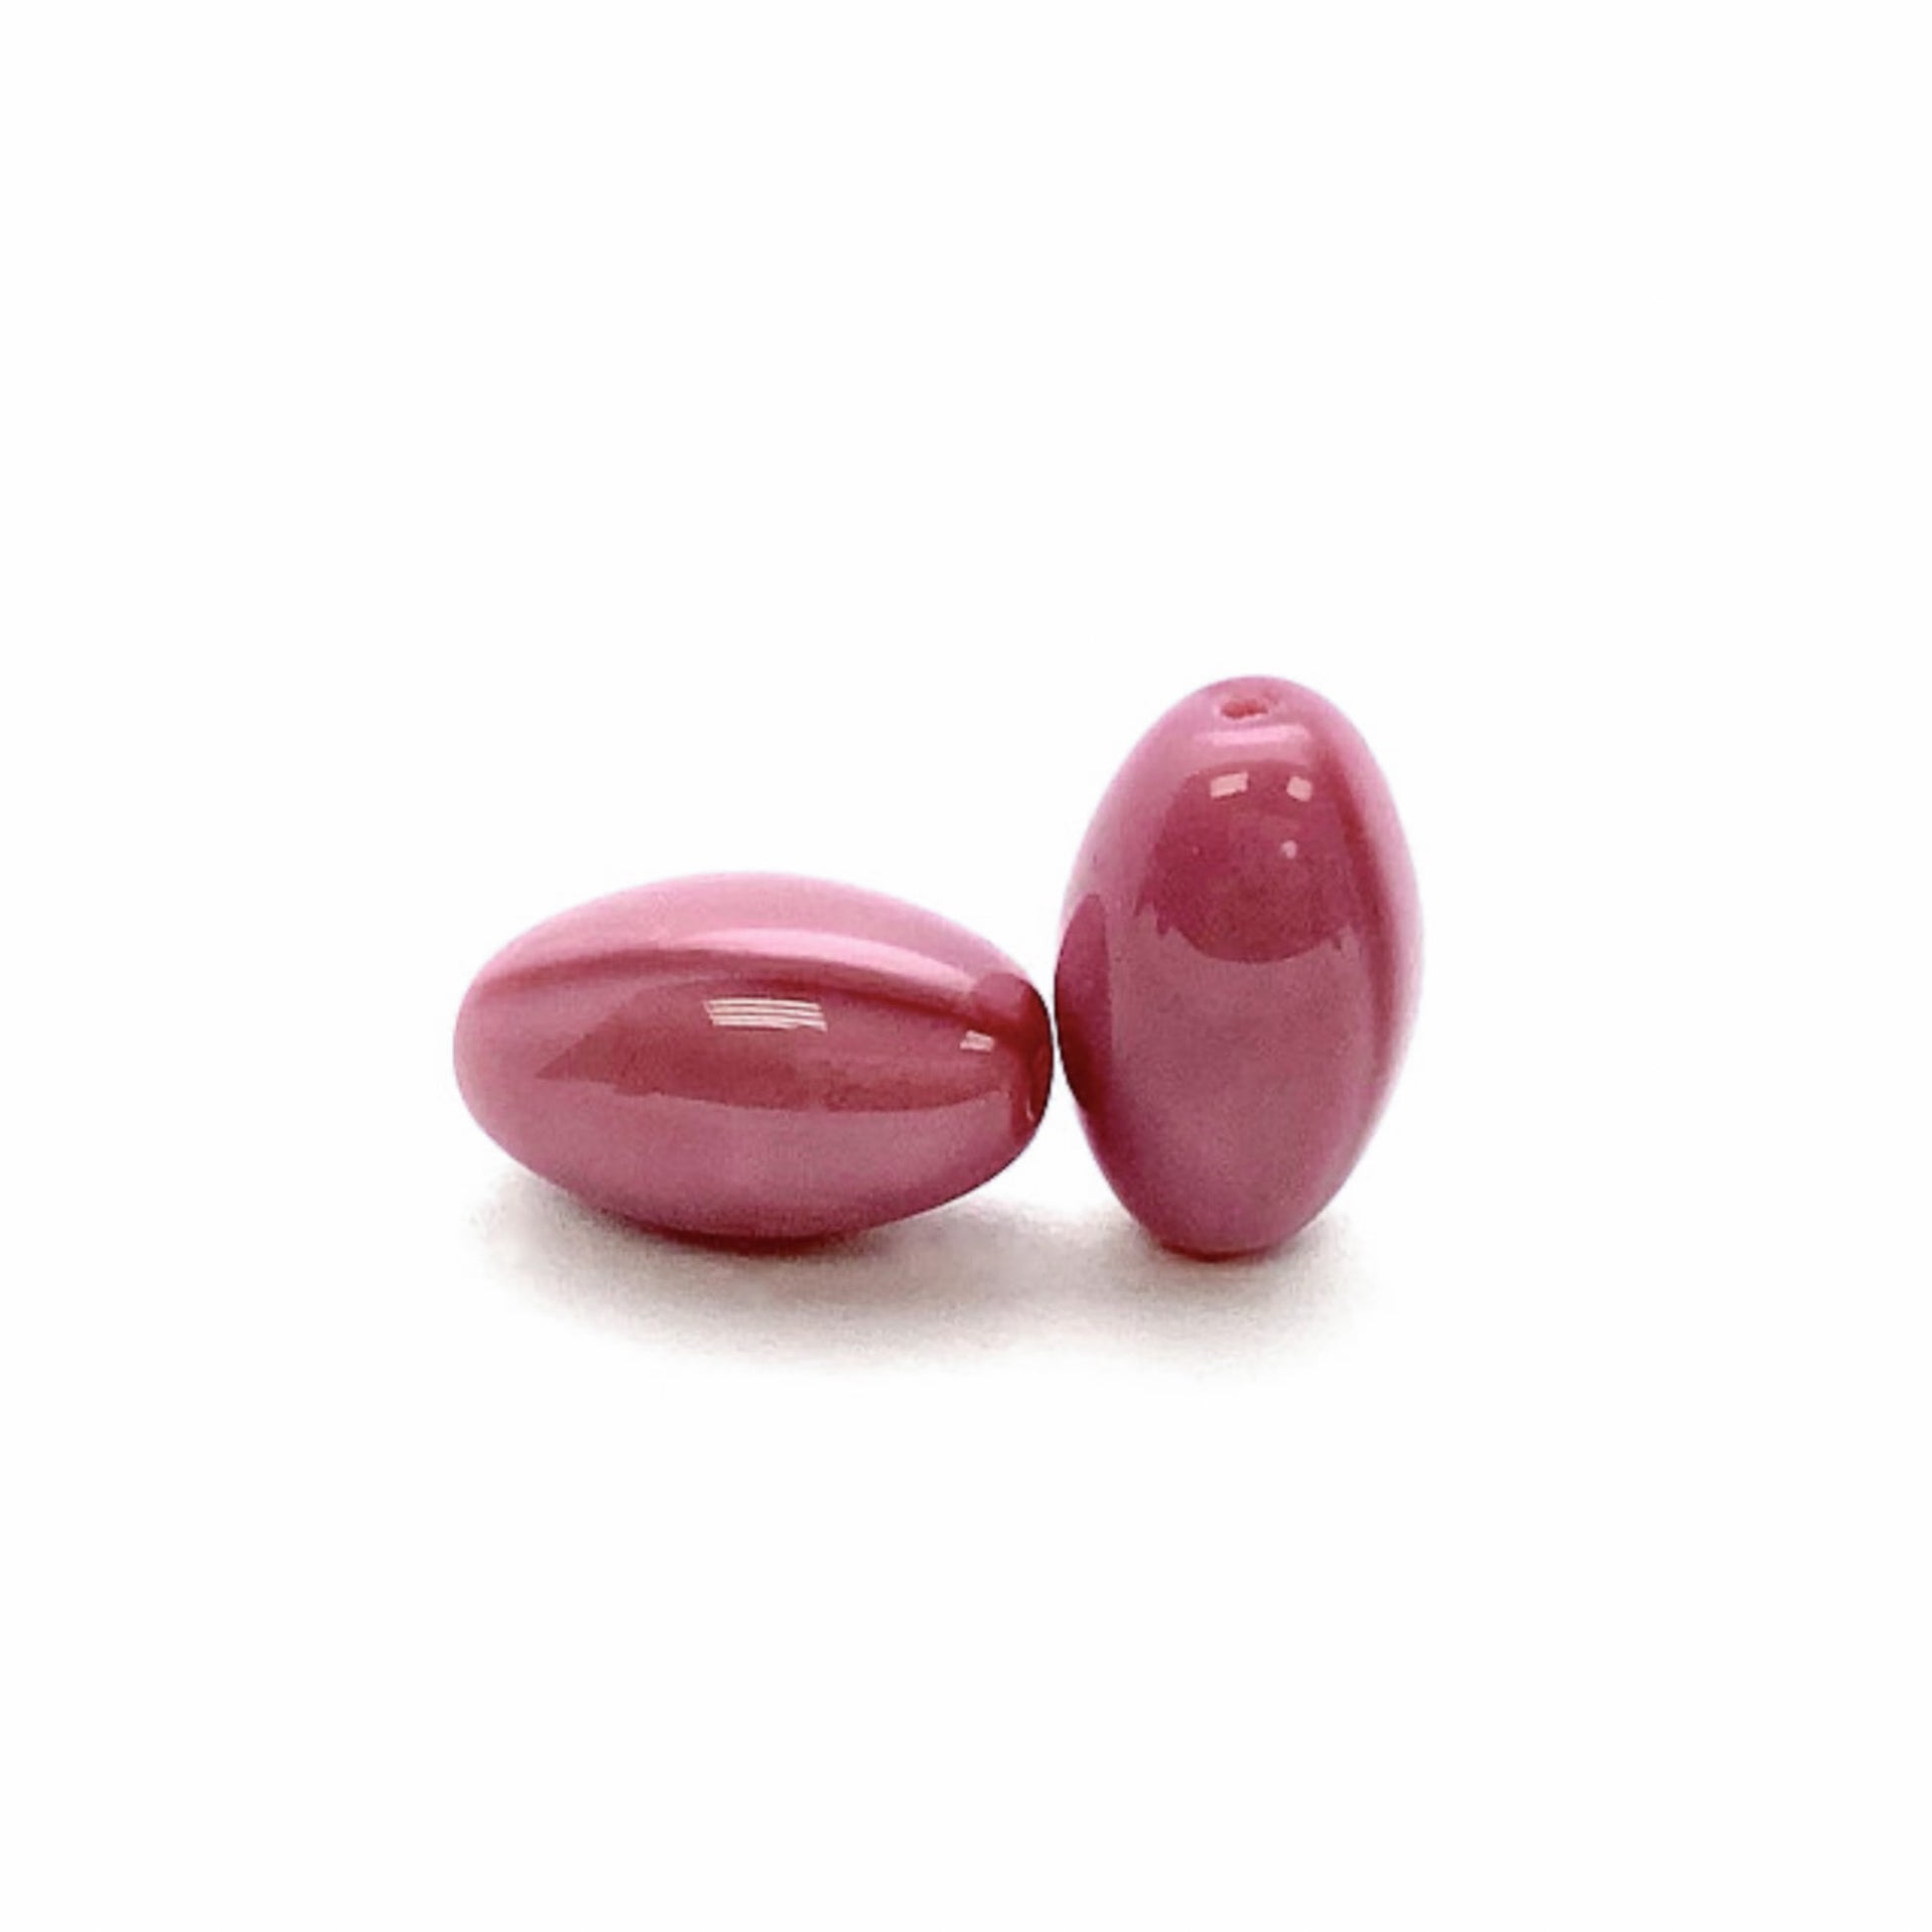 Olive Opaque Pink Pressed Czech 18mm x 11mm Glass Bead - 8 pcs.-The Bead Gallery Honolulu